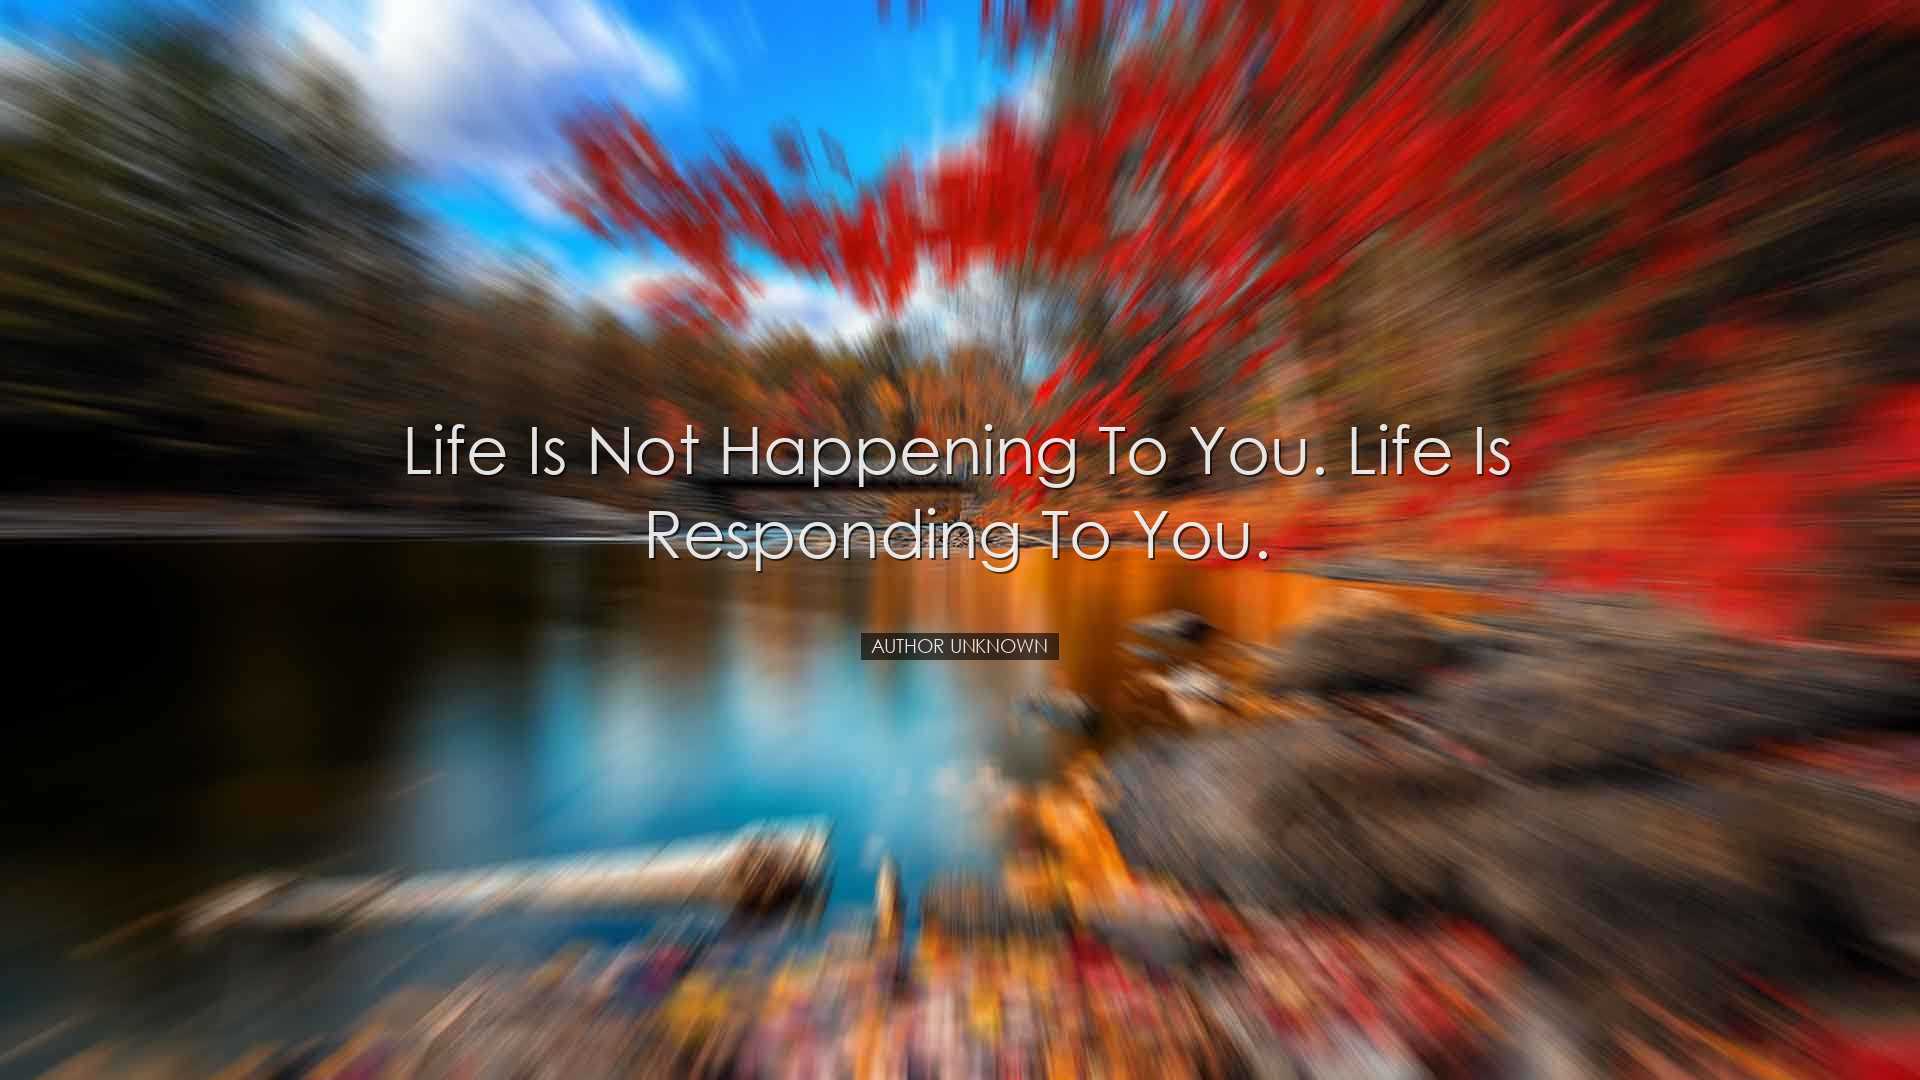 Life is not happening to you. Life is responding to you. - Author